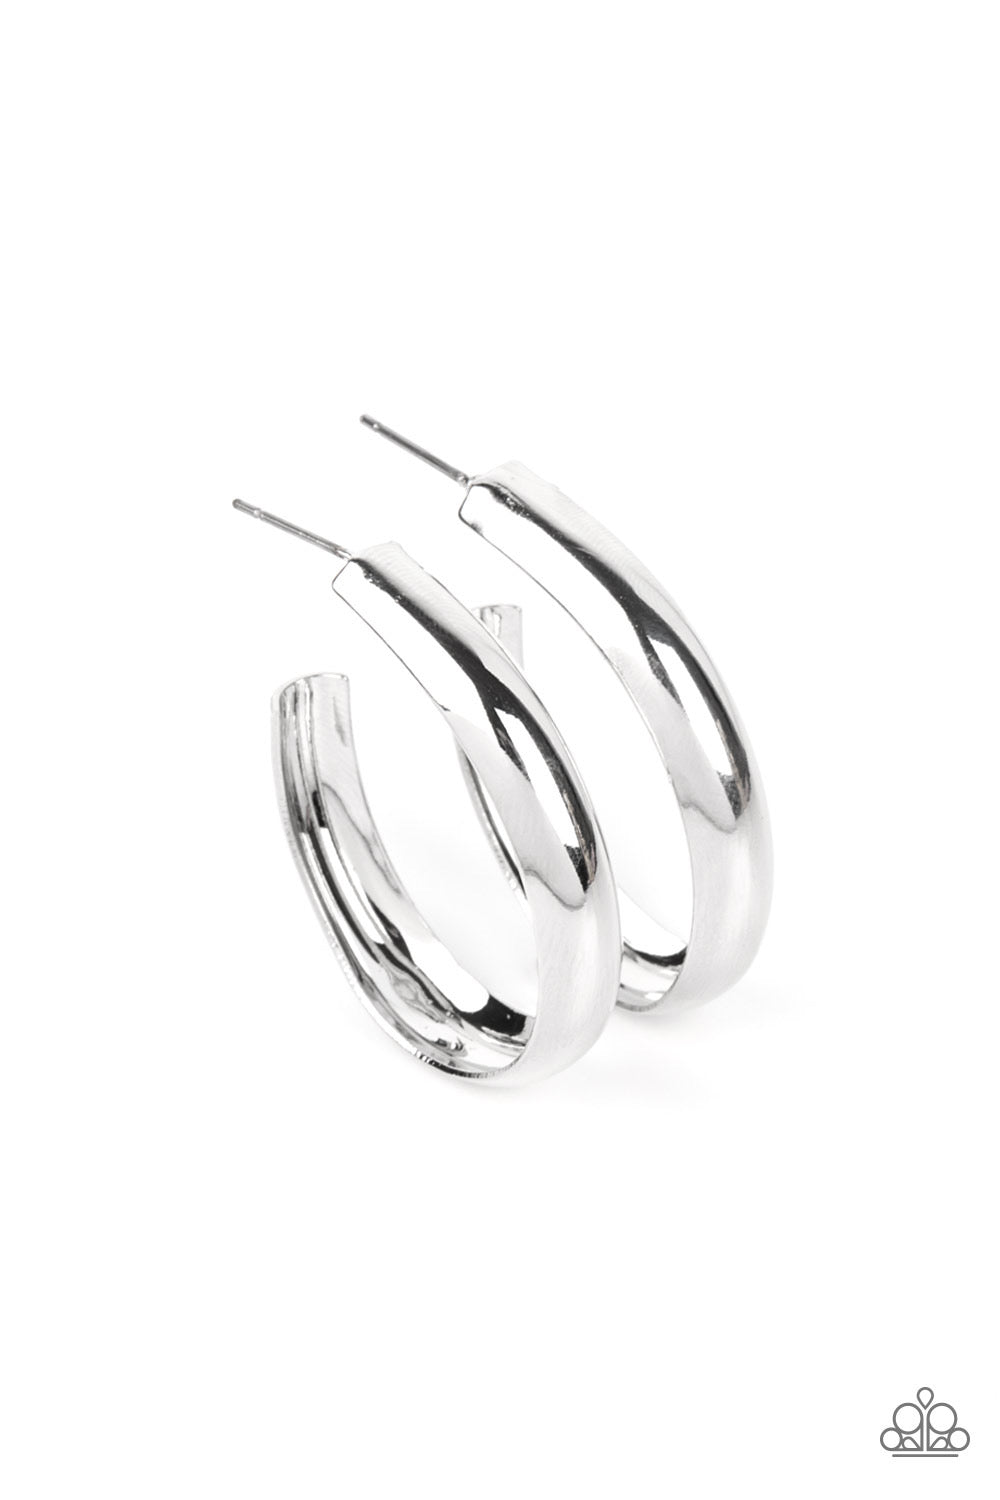 Paparazzi Champion Curves - Silver Earrings 